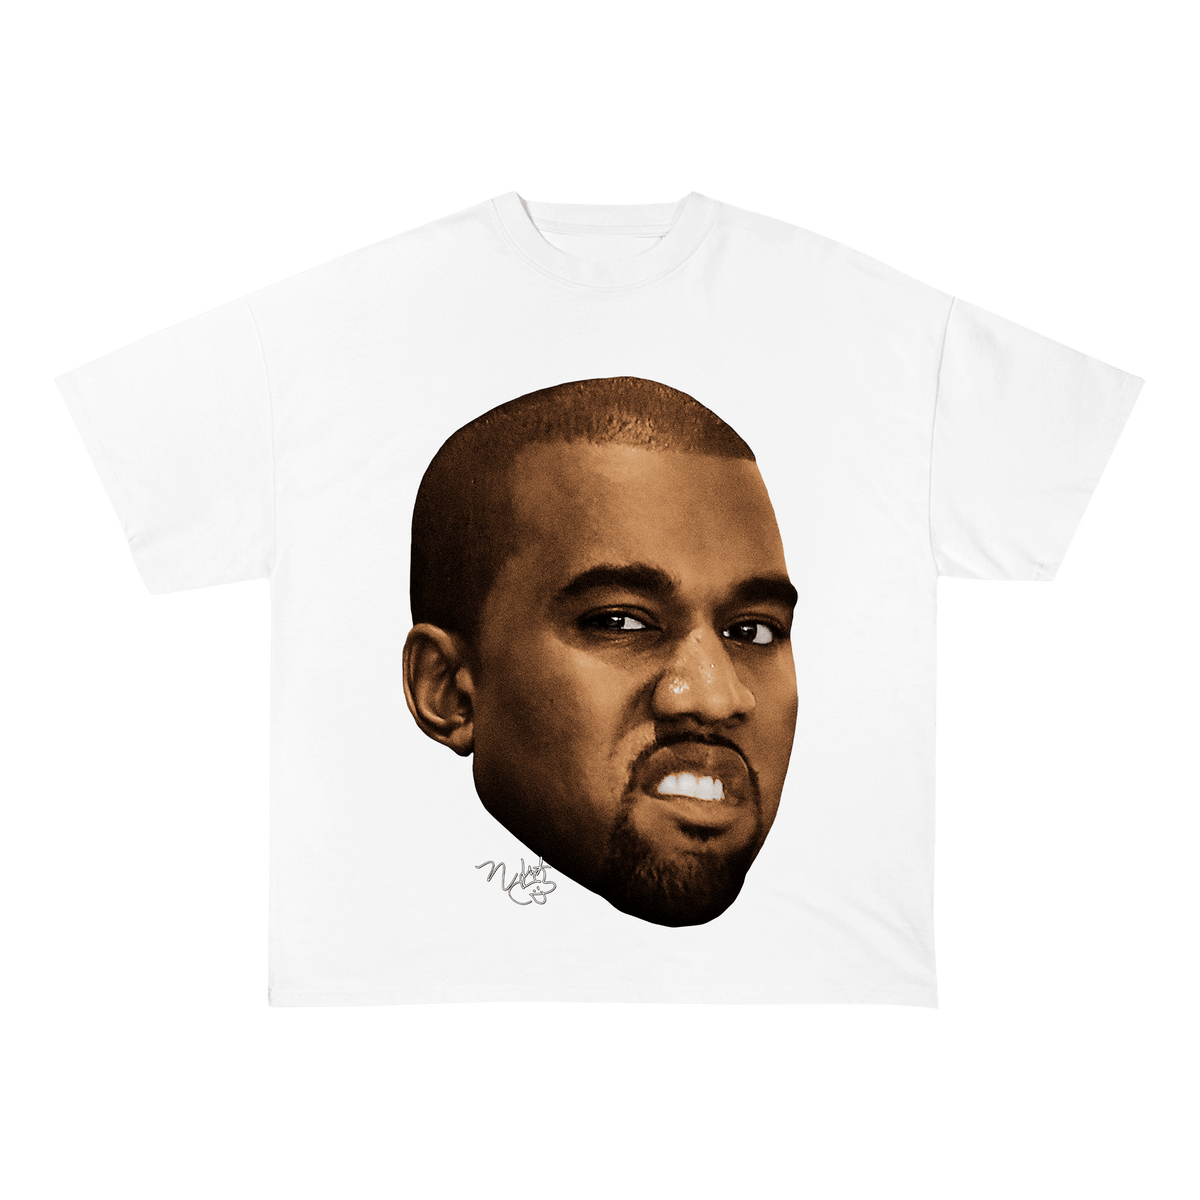 RDMCLOTHINGART tapestry hoodie KANYEWEST WEIGHT COTTON TEE-8027